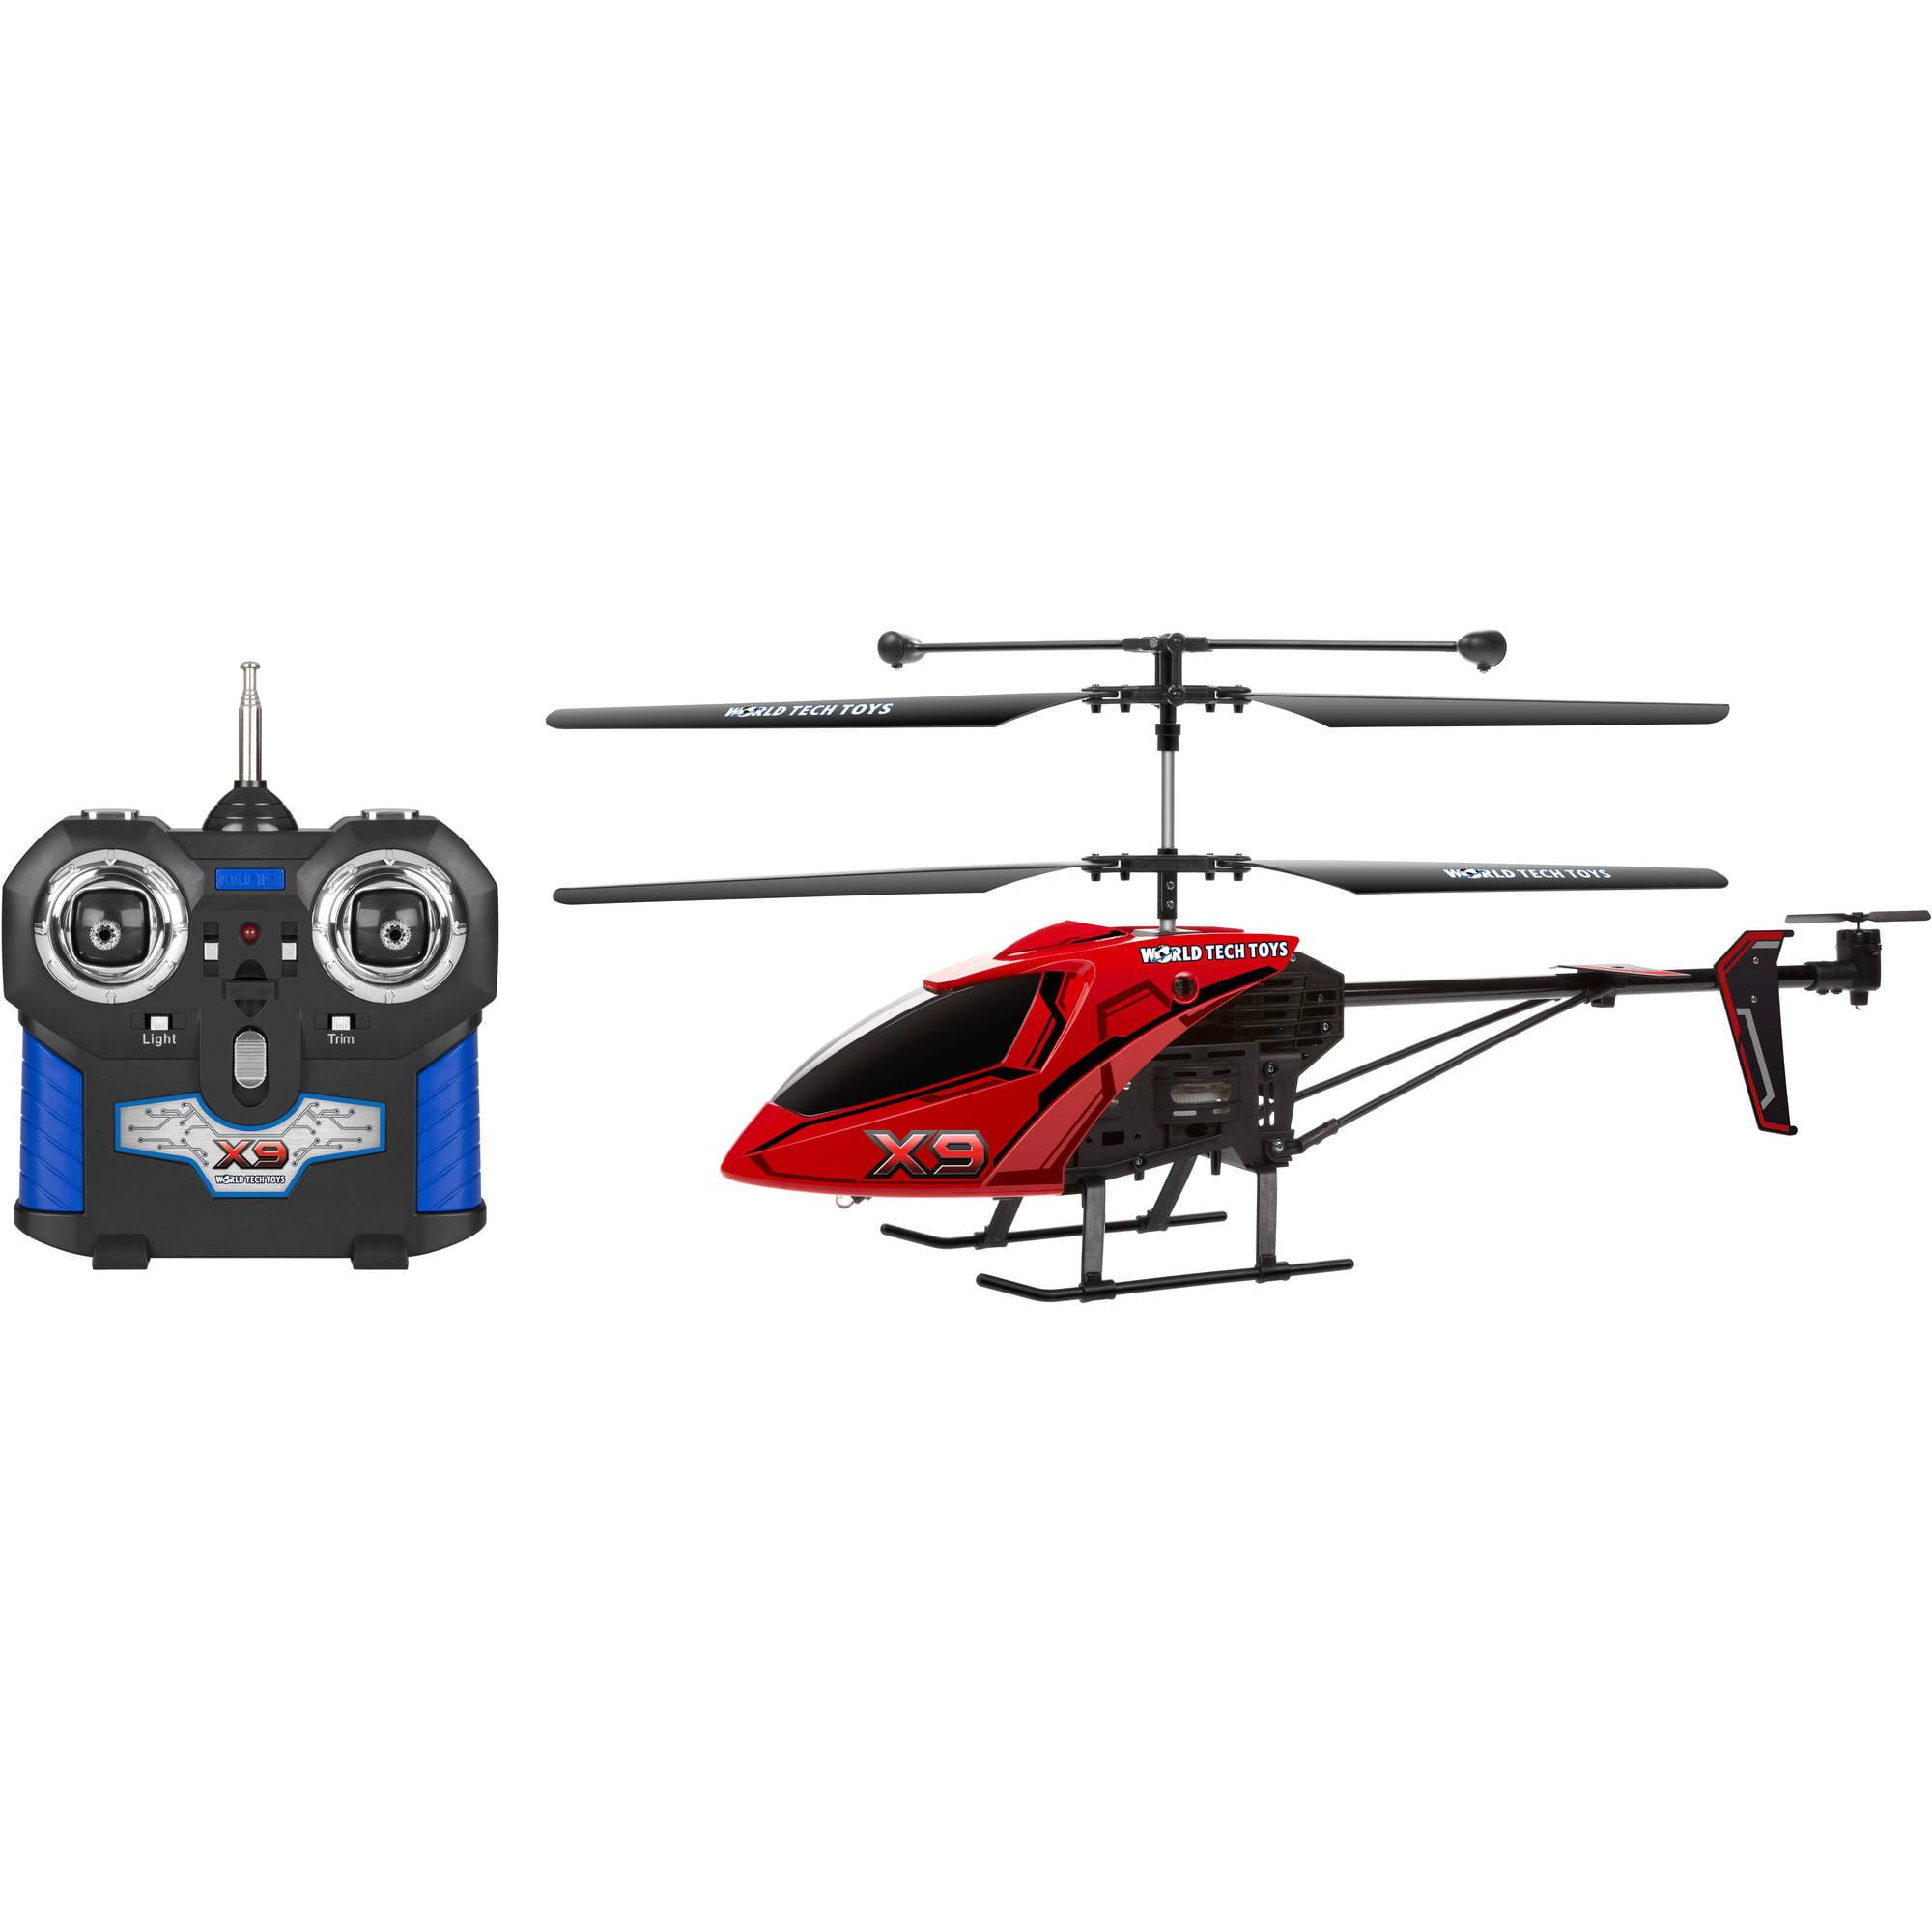 World Tech Toys Helicopter: Wide Range Control and Stable Flight: The World Tech Toys Helicopter